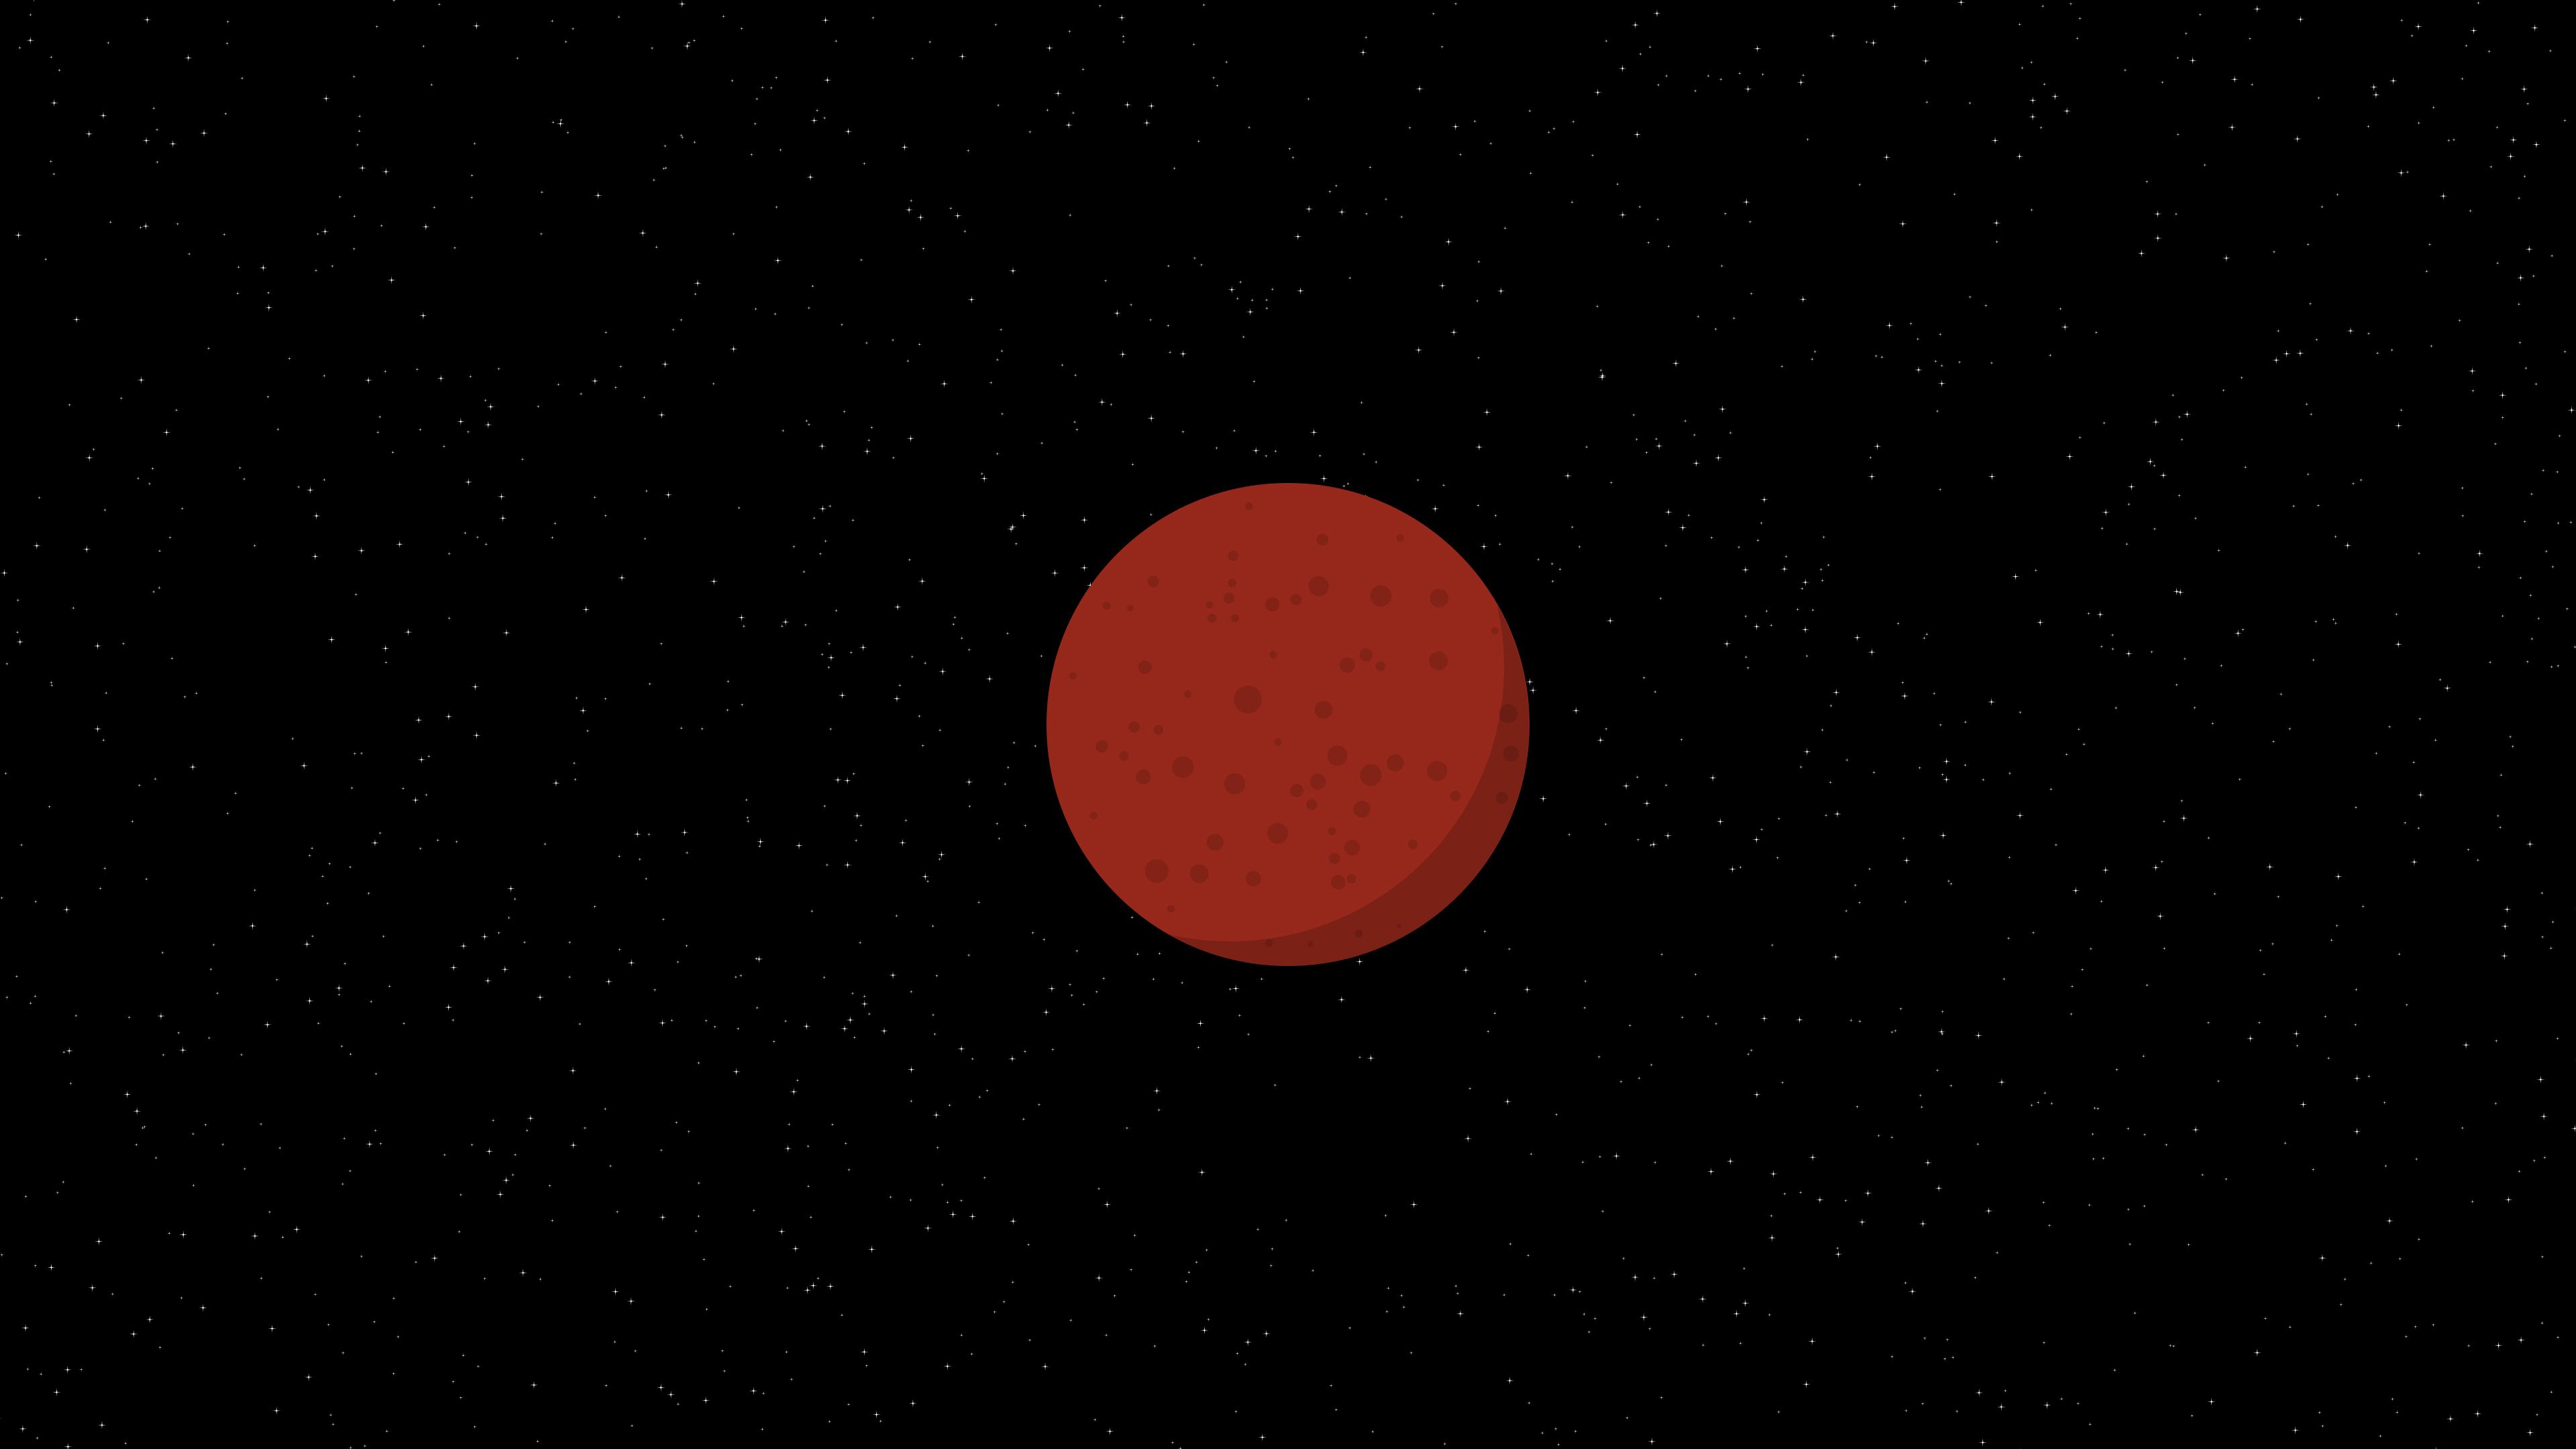 Mars Minimal Art, HD Artist, 4k Wallpaper, Image, Background, Photo and Picture